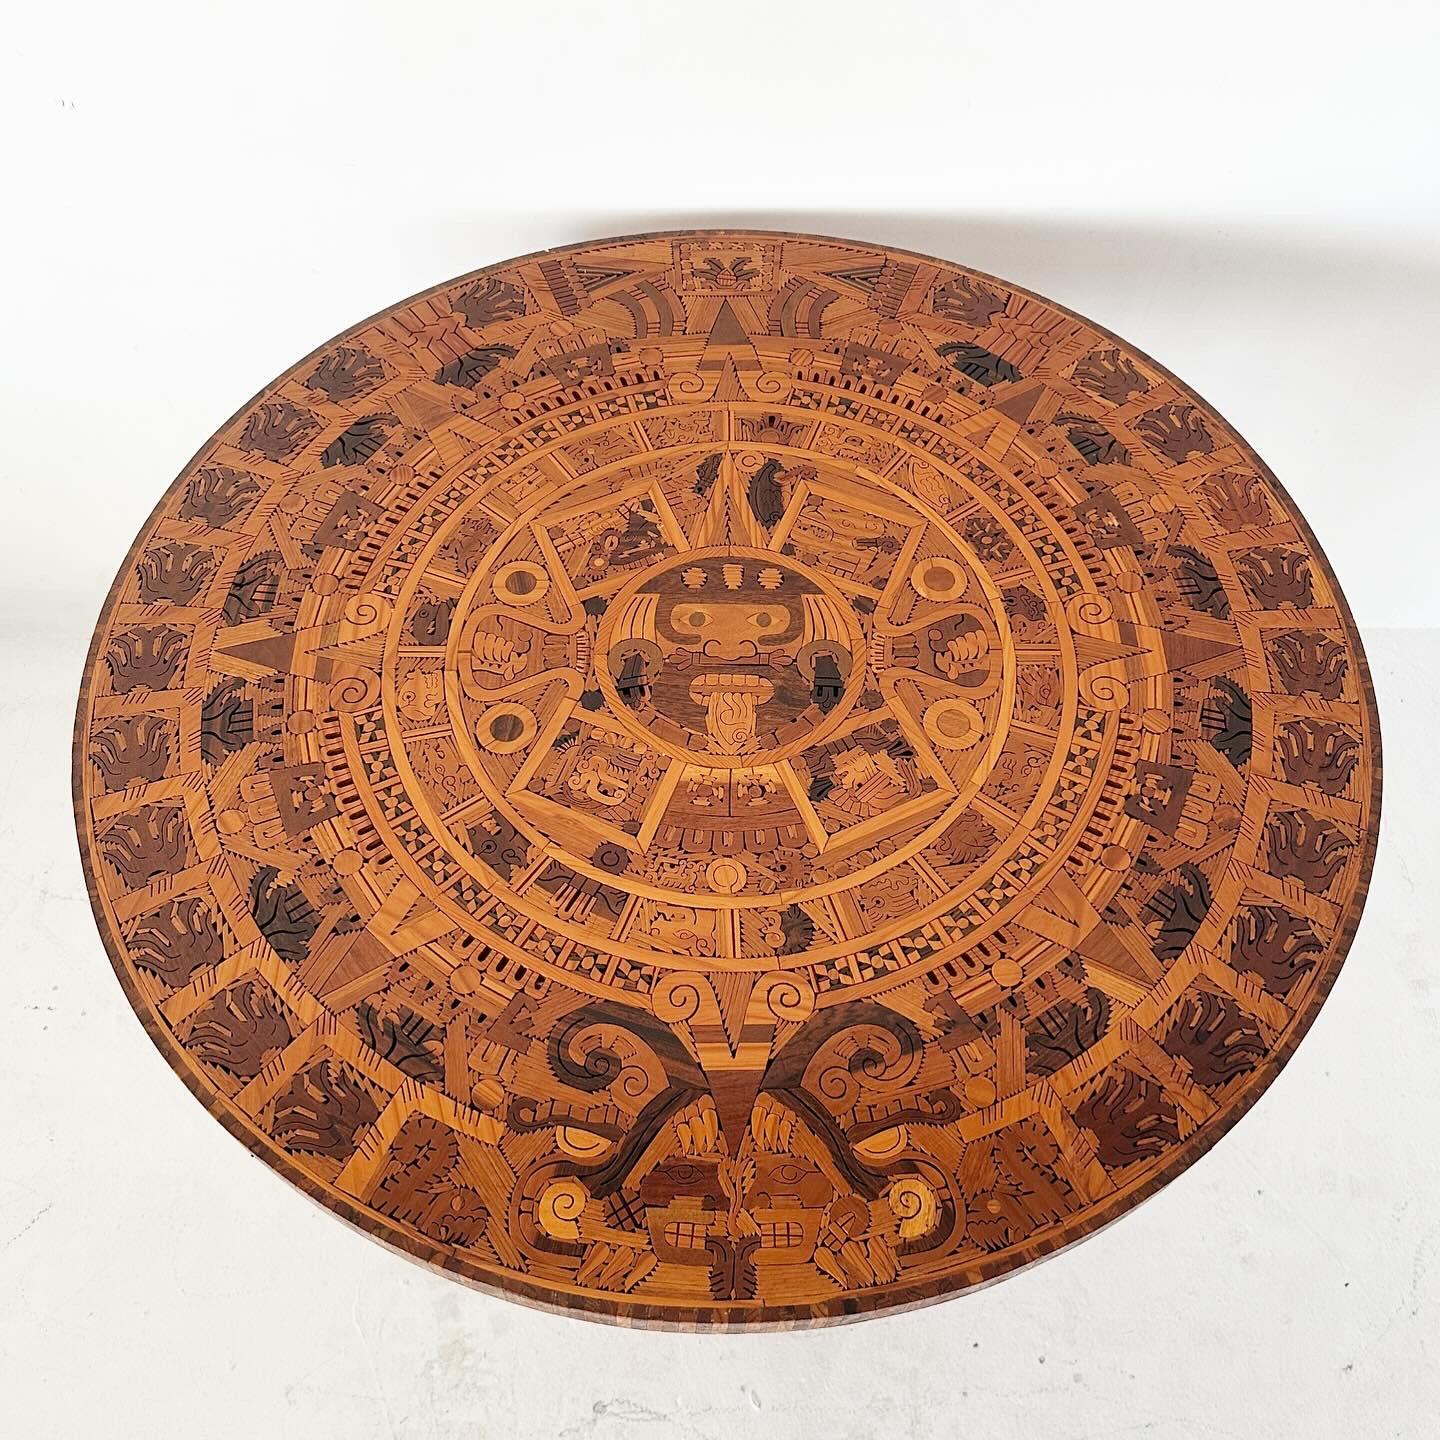 Handcrafted round wooden inlay Aztec calendar dining table. Incredible detail, good vintage condition. Circular top separates from solid wood base for easy transport.

H28.5 Diameter 40.5 (seat height)